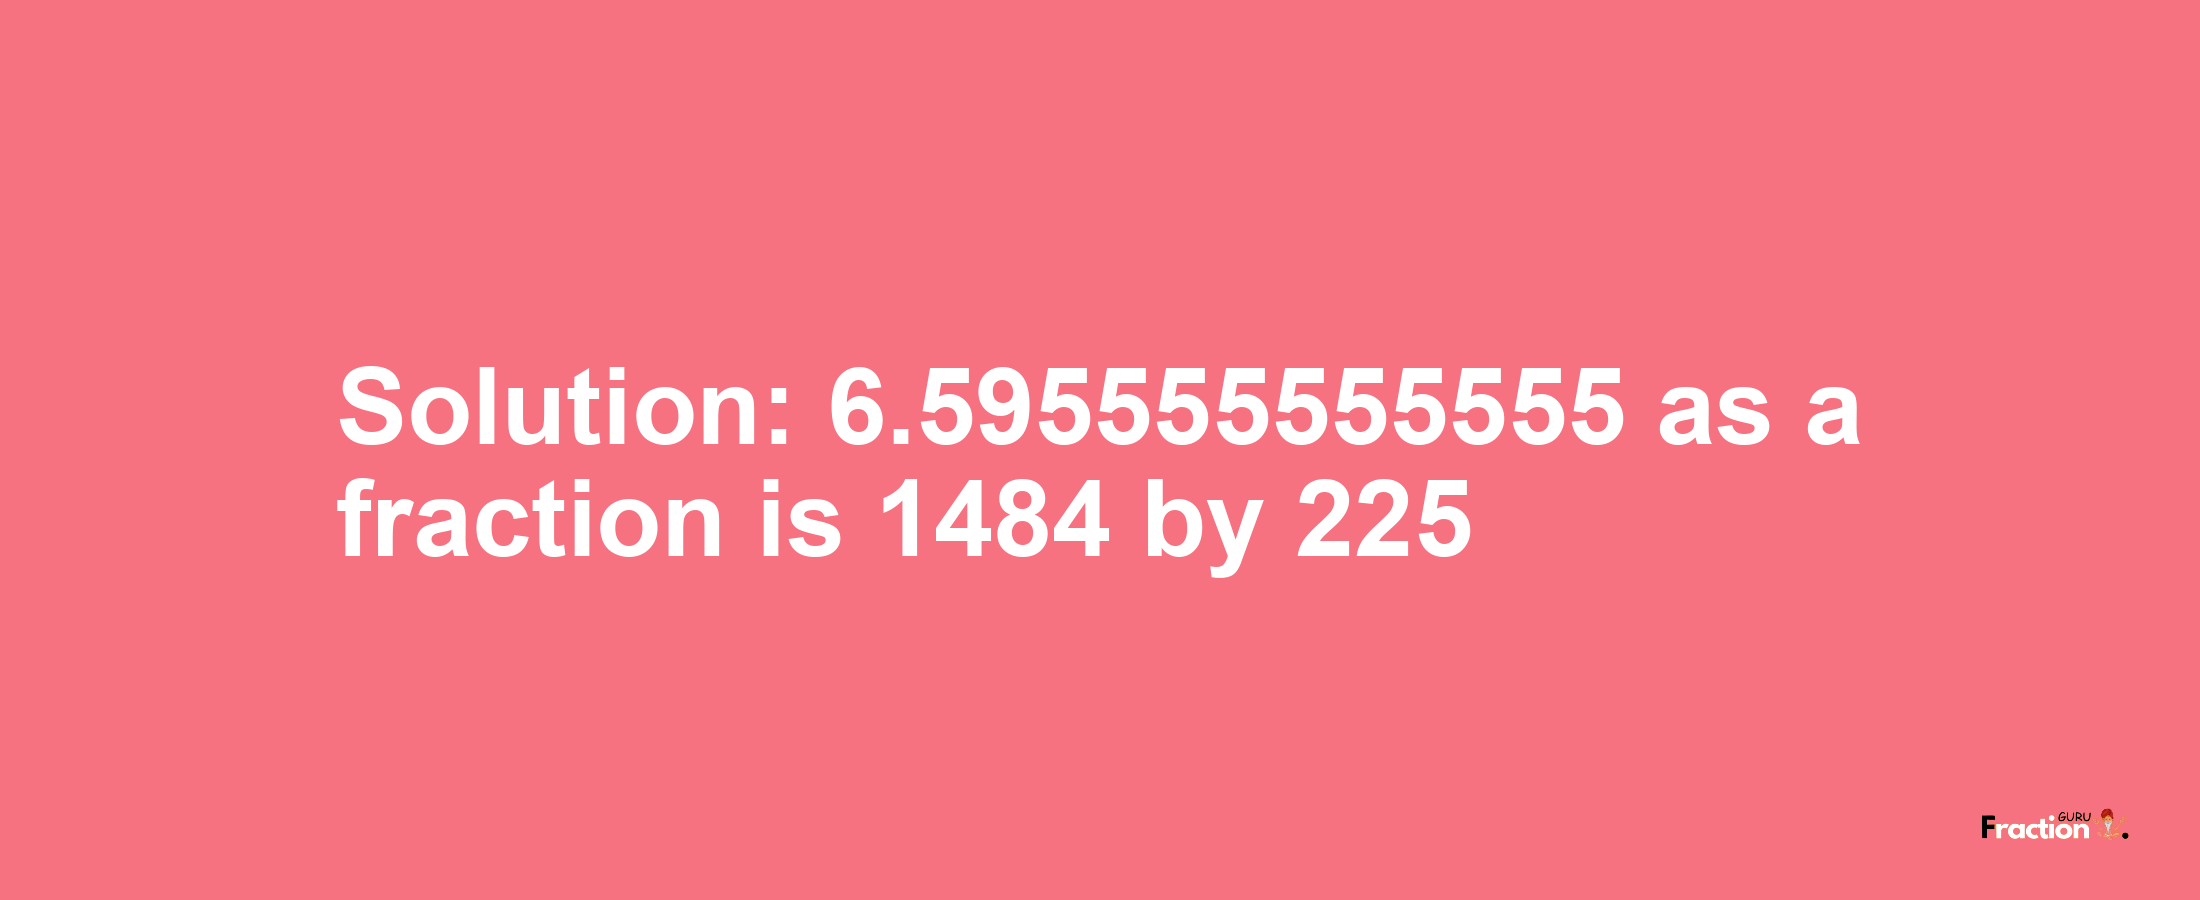 Solution:6.595555555555 as a fraction is 1484/225